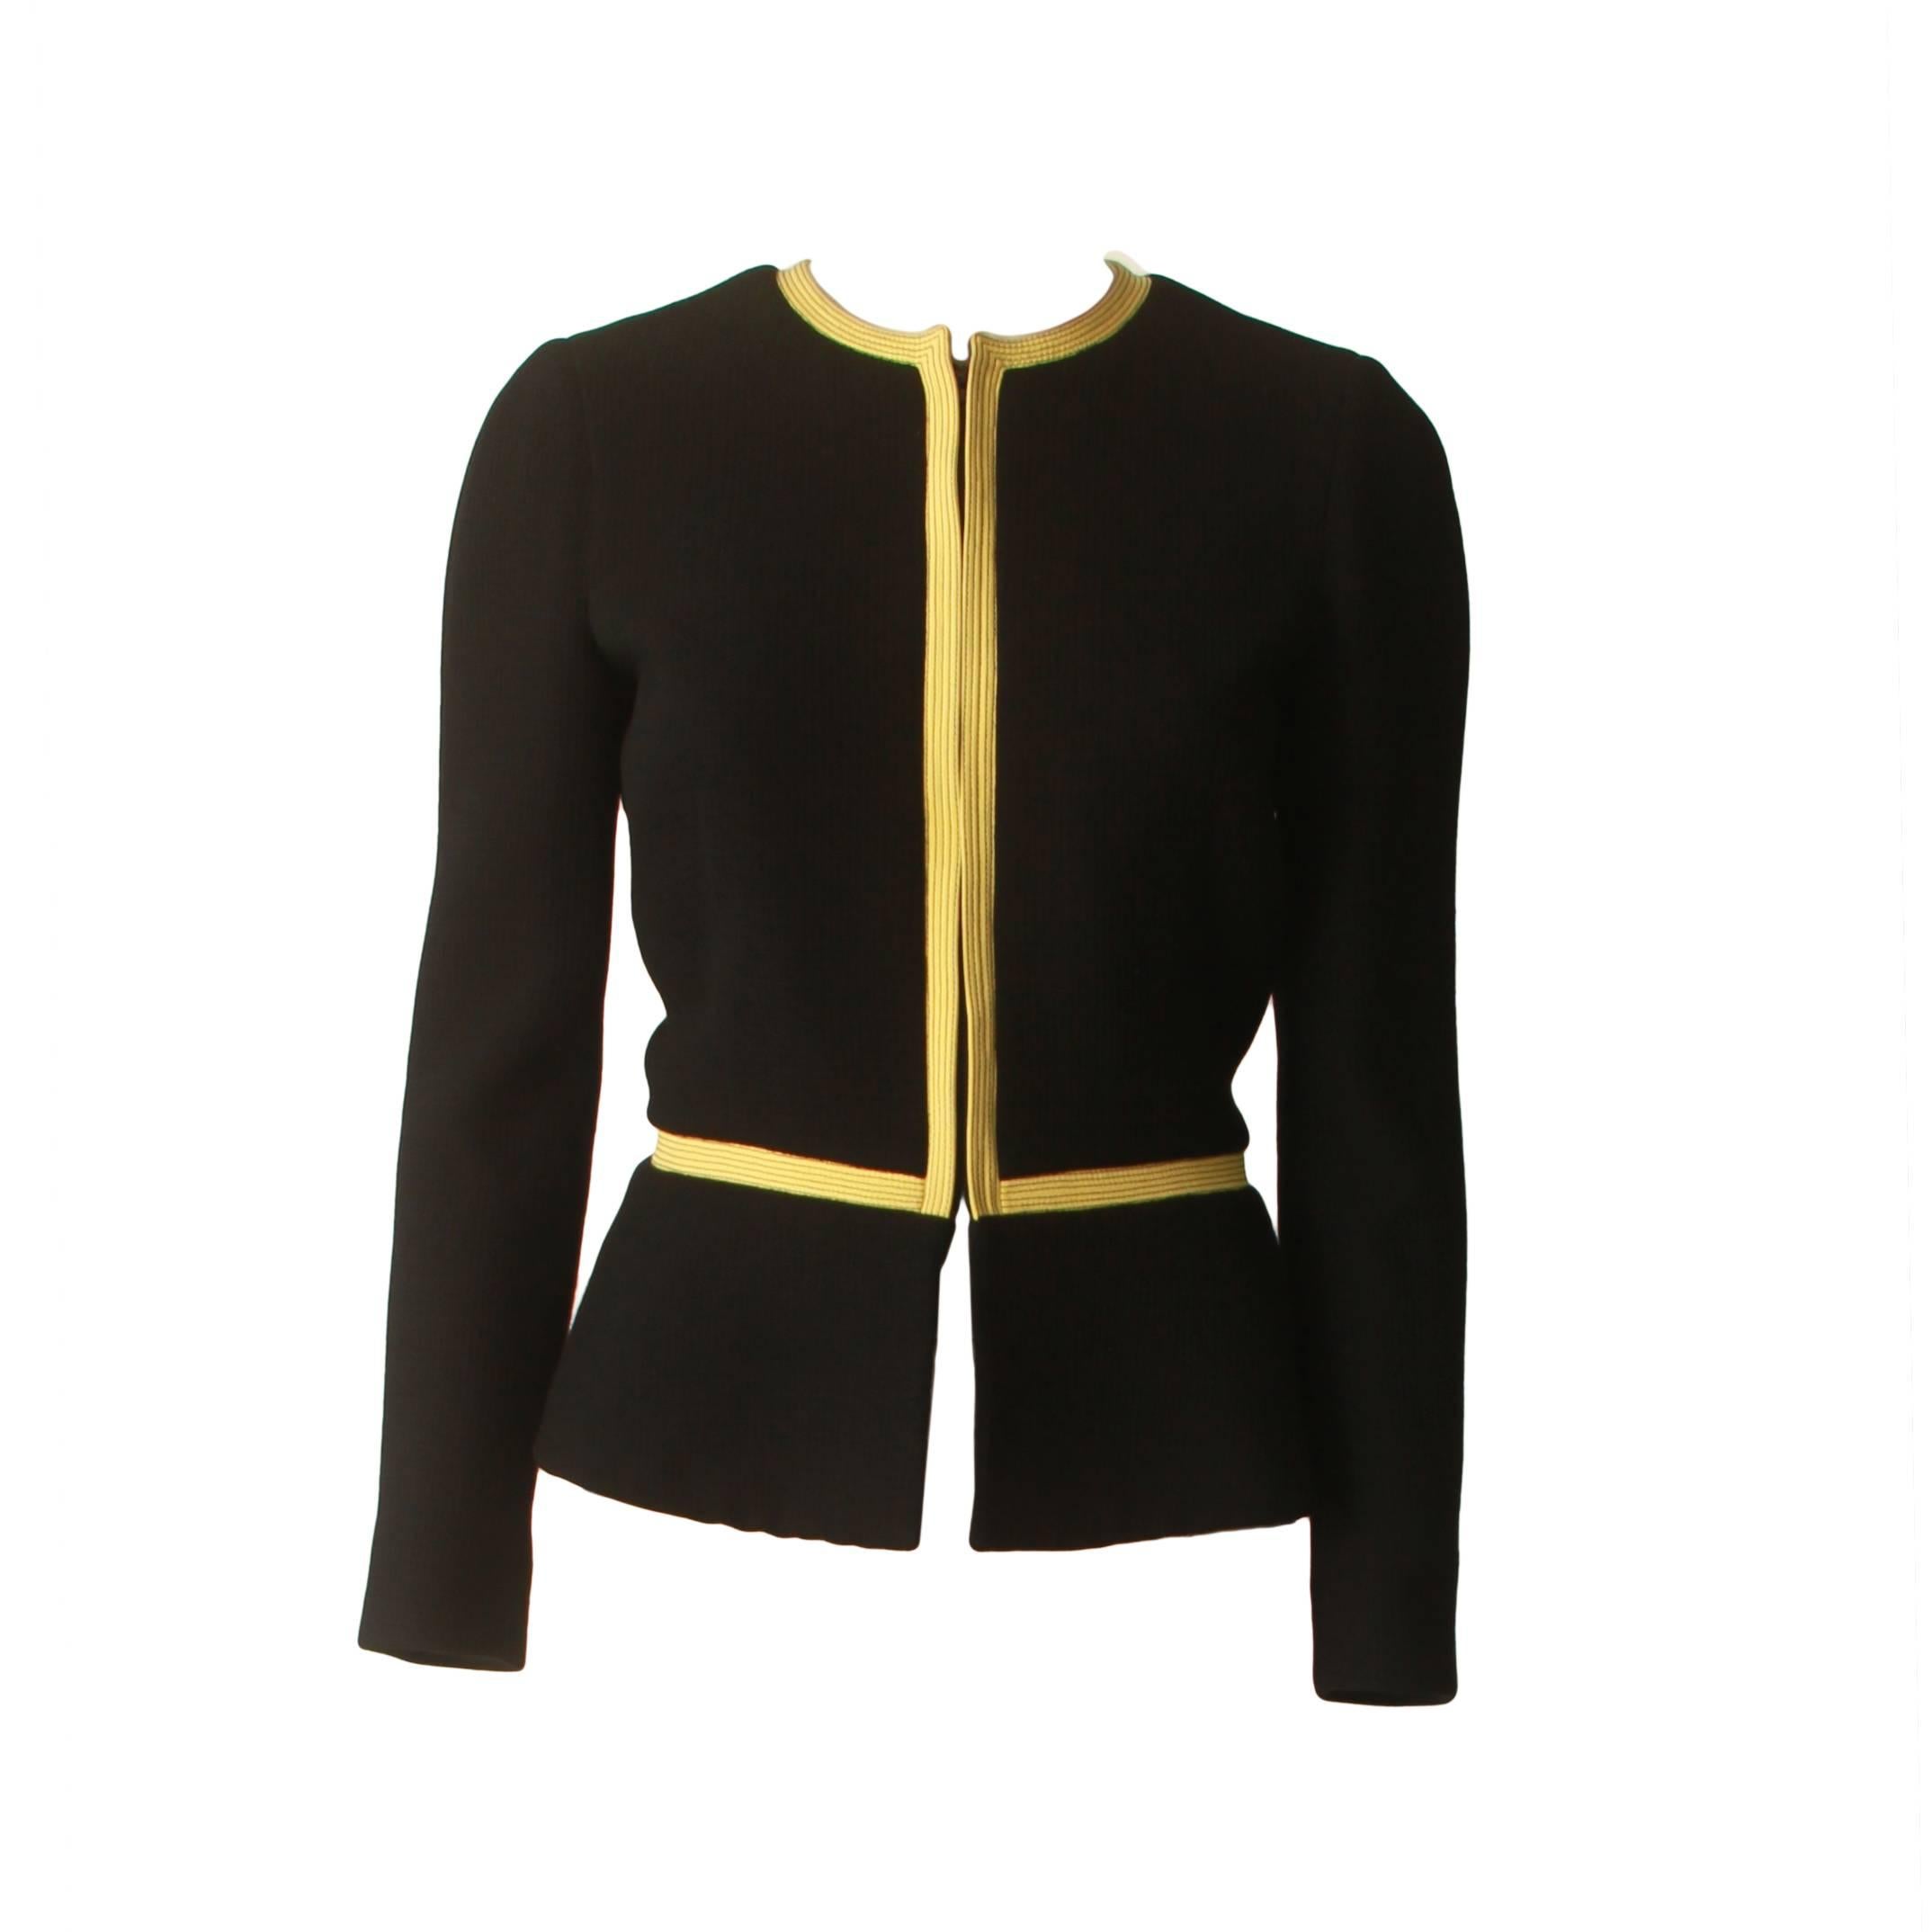 Gianni Versace Zip Fronted Jacket Fall 1991 For Sale